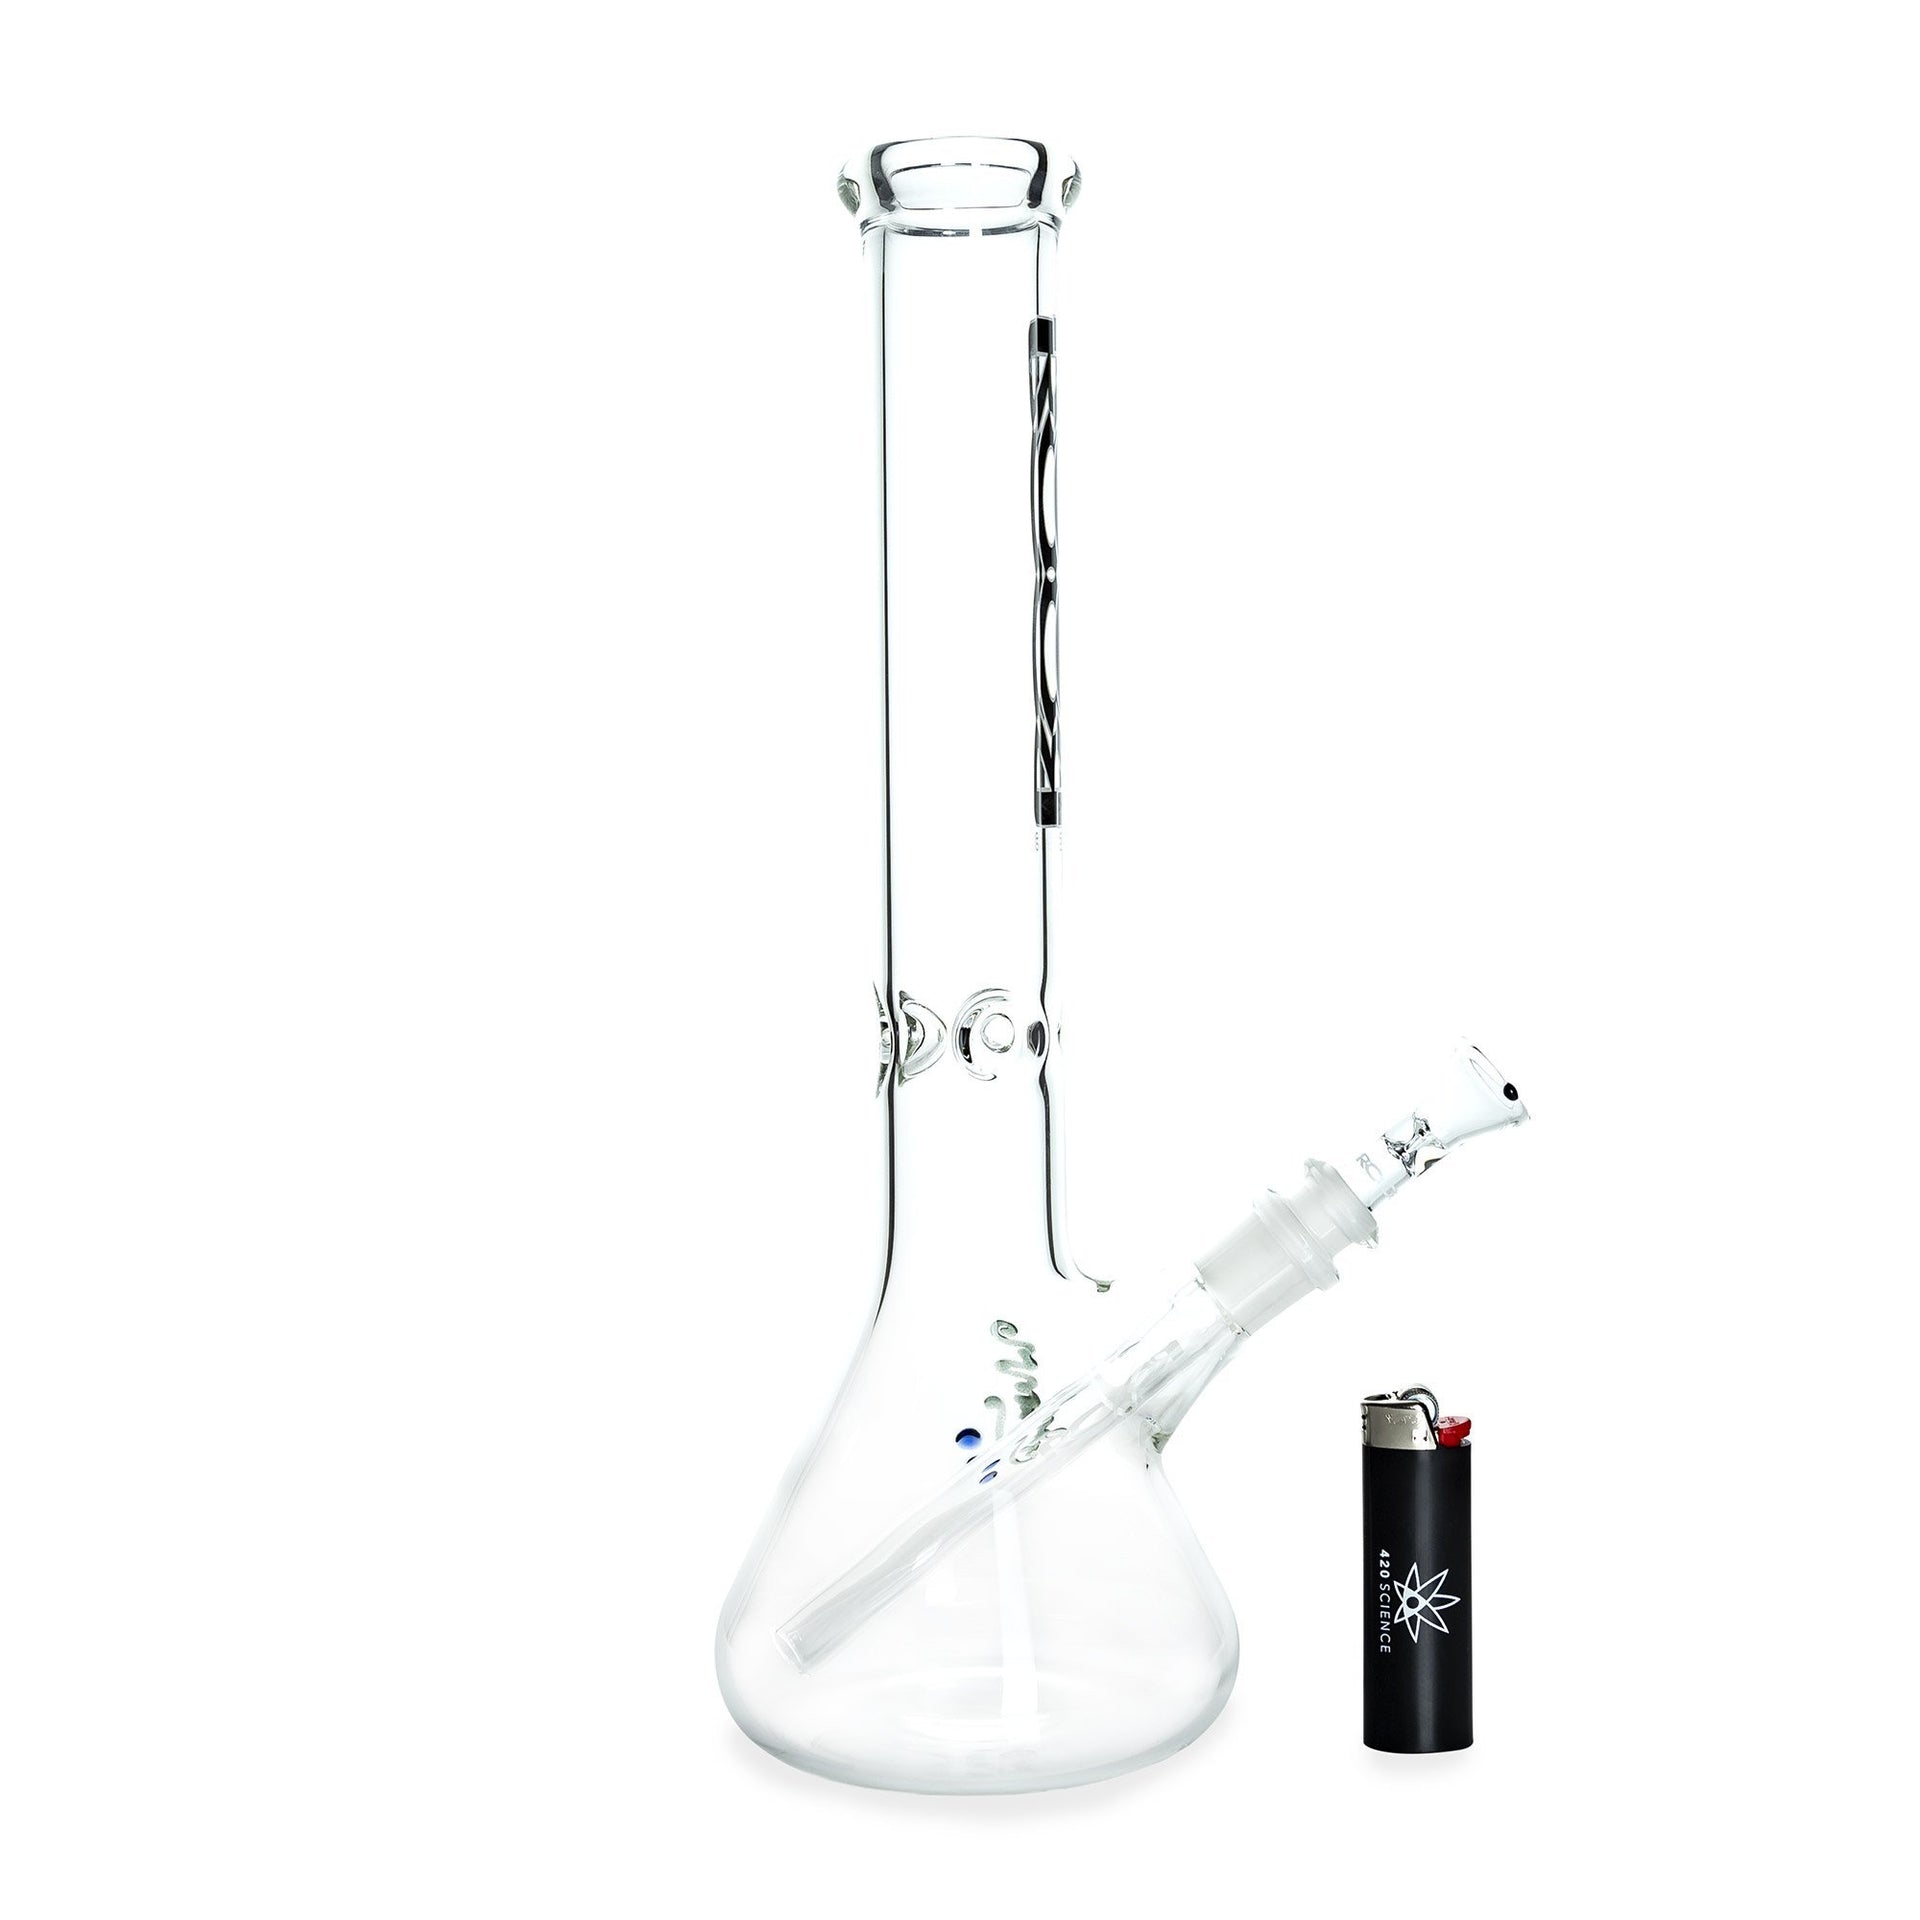 ROOR 14in Beaker 45x5mm - 420 Science - The most trusted online smoke shop.